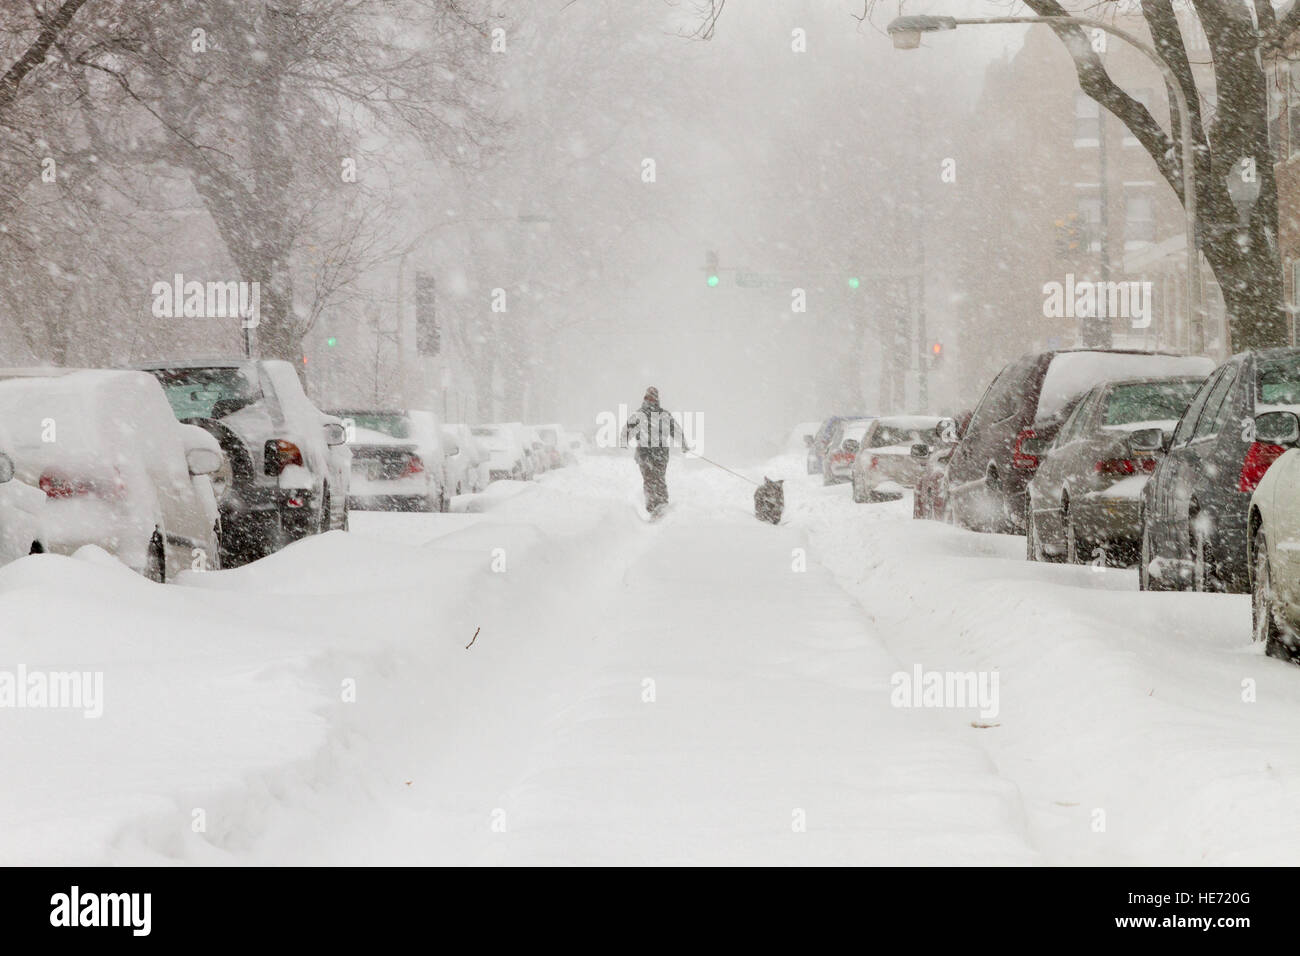 Blizzard in Chicago with snow filled street and single person walking  their dog during snow storm Stock Photo